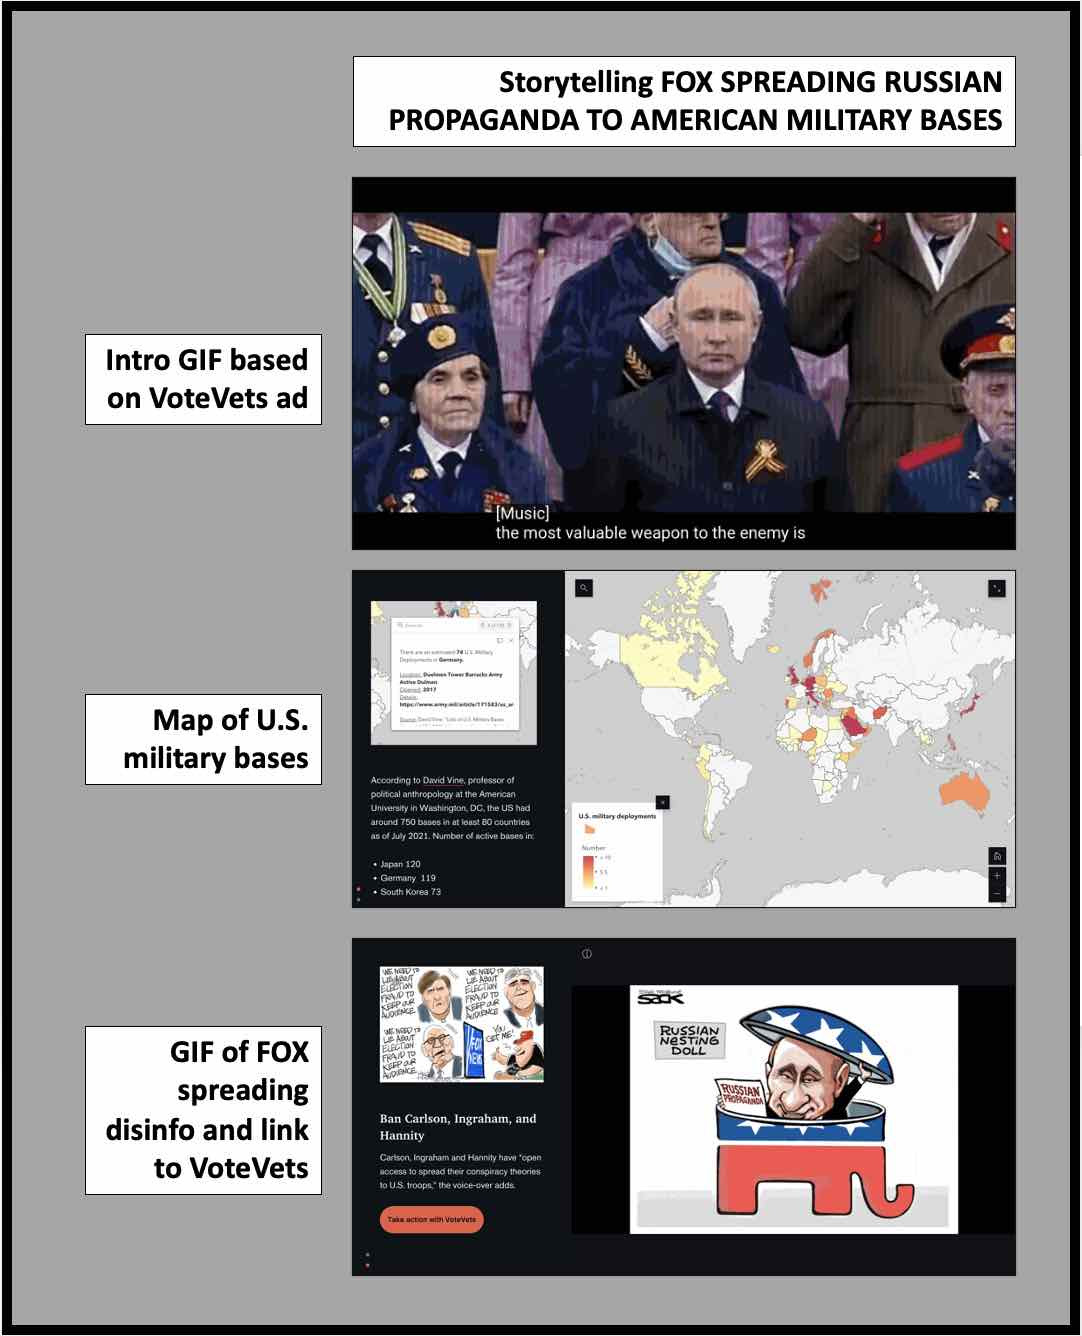 Storytelling how Fox News spreads Russian propaganda to US military bases.